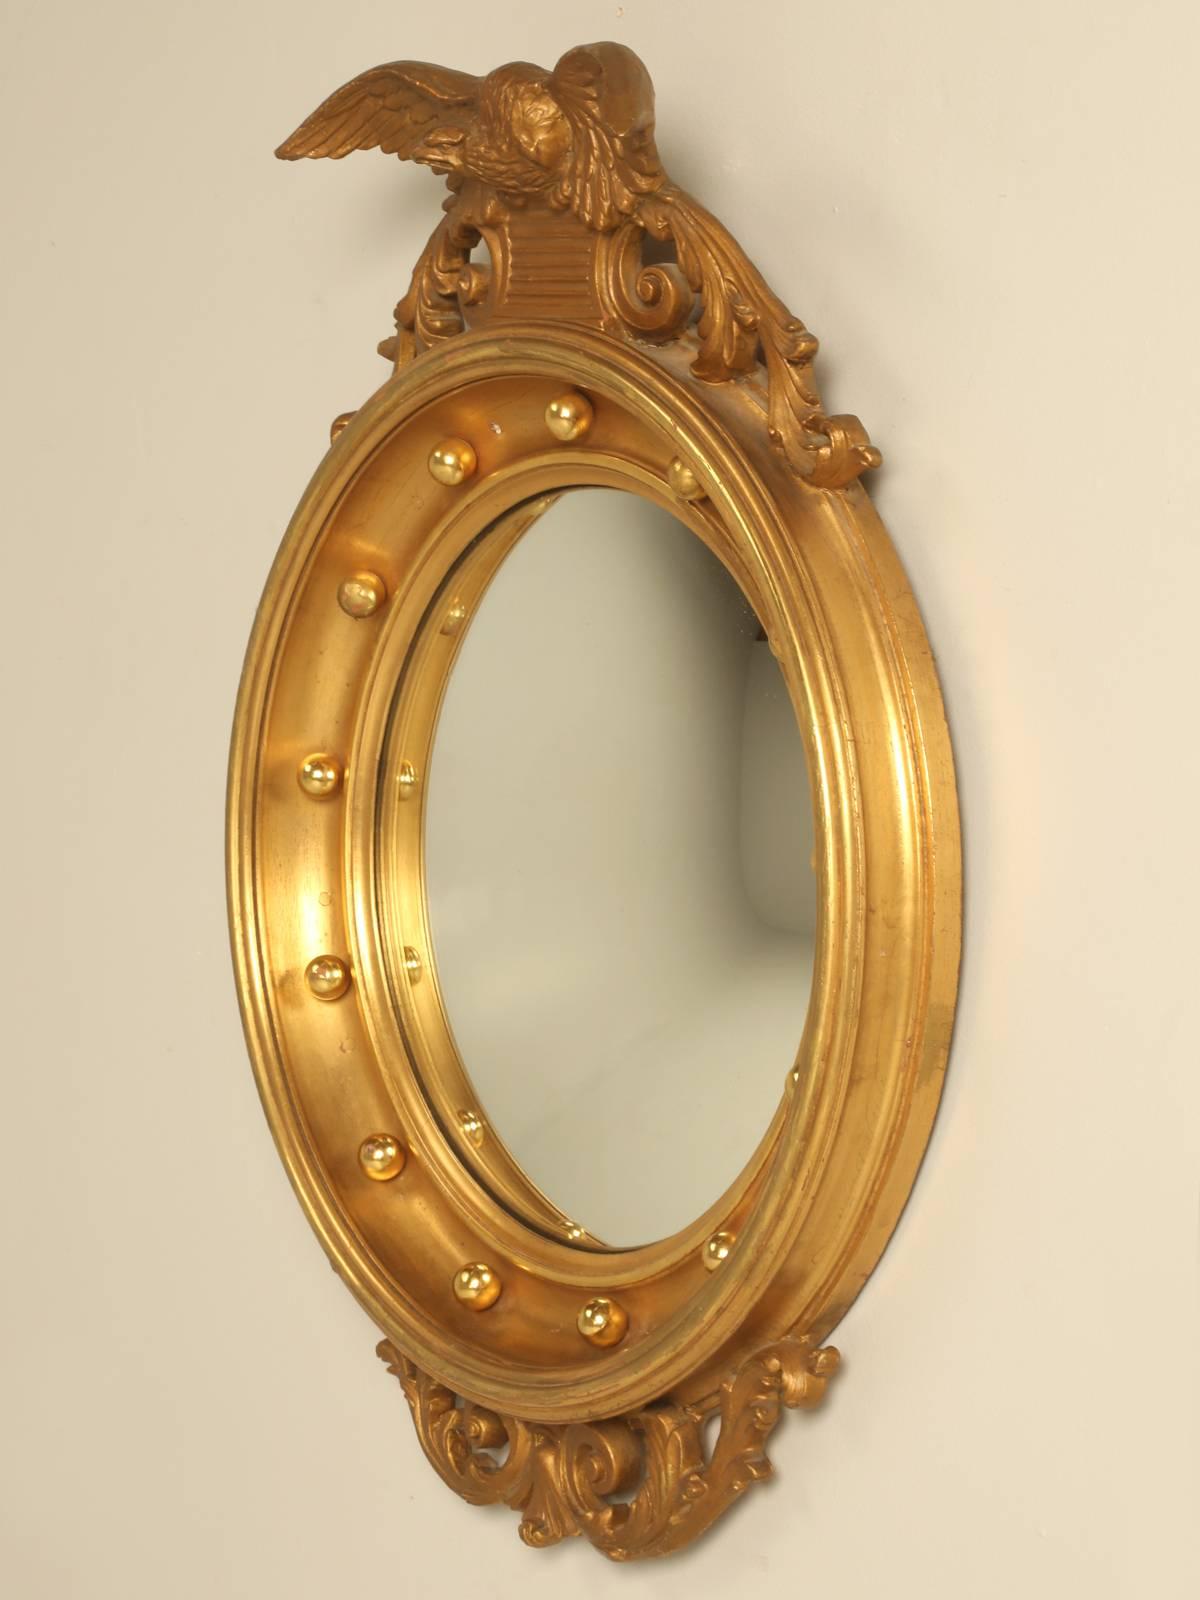 Regency eagle convex mirror with a gold leaf finish, probably from the 1950s or 1960s. This one is carved wood and not foam like so many of the current reproduction versions. No prior repairs.